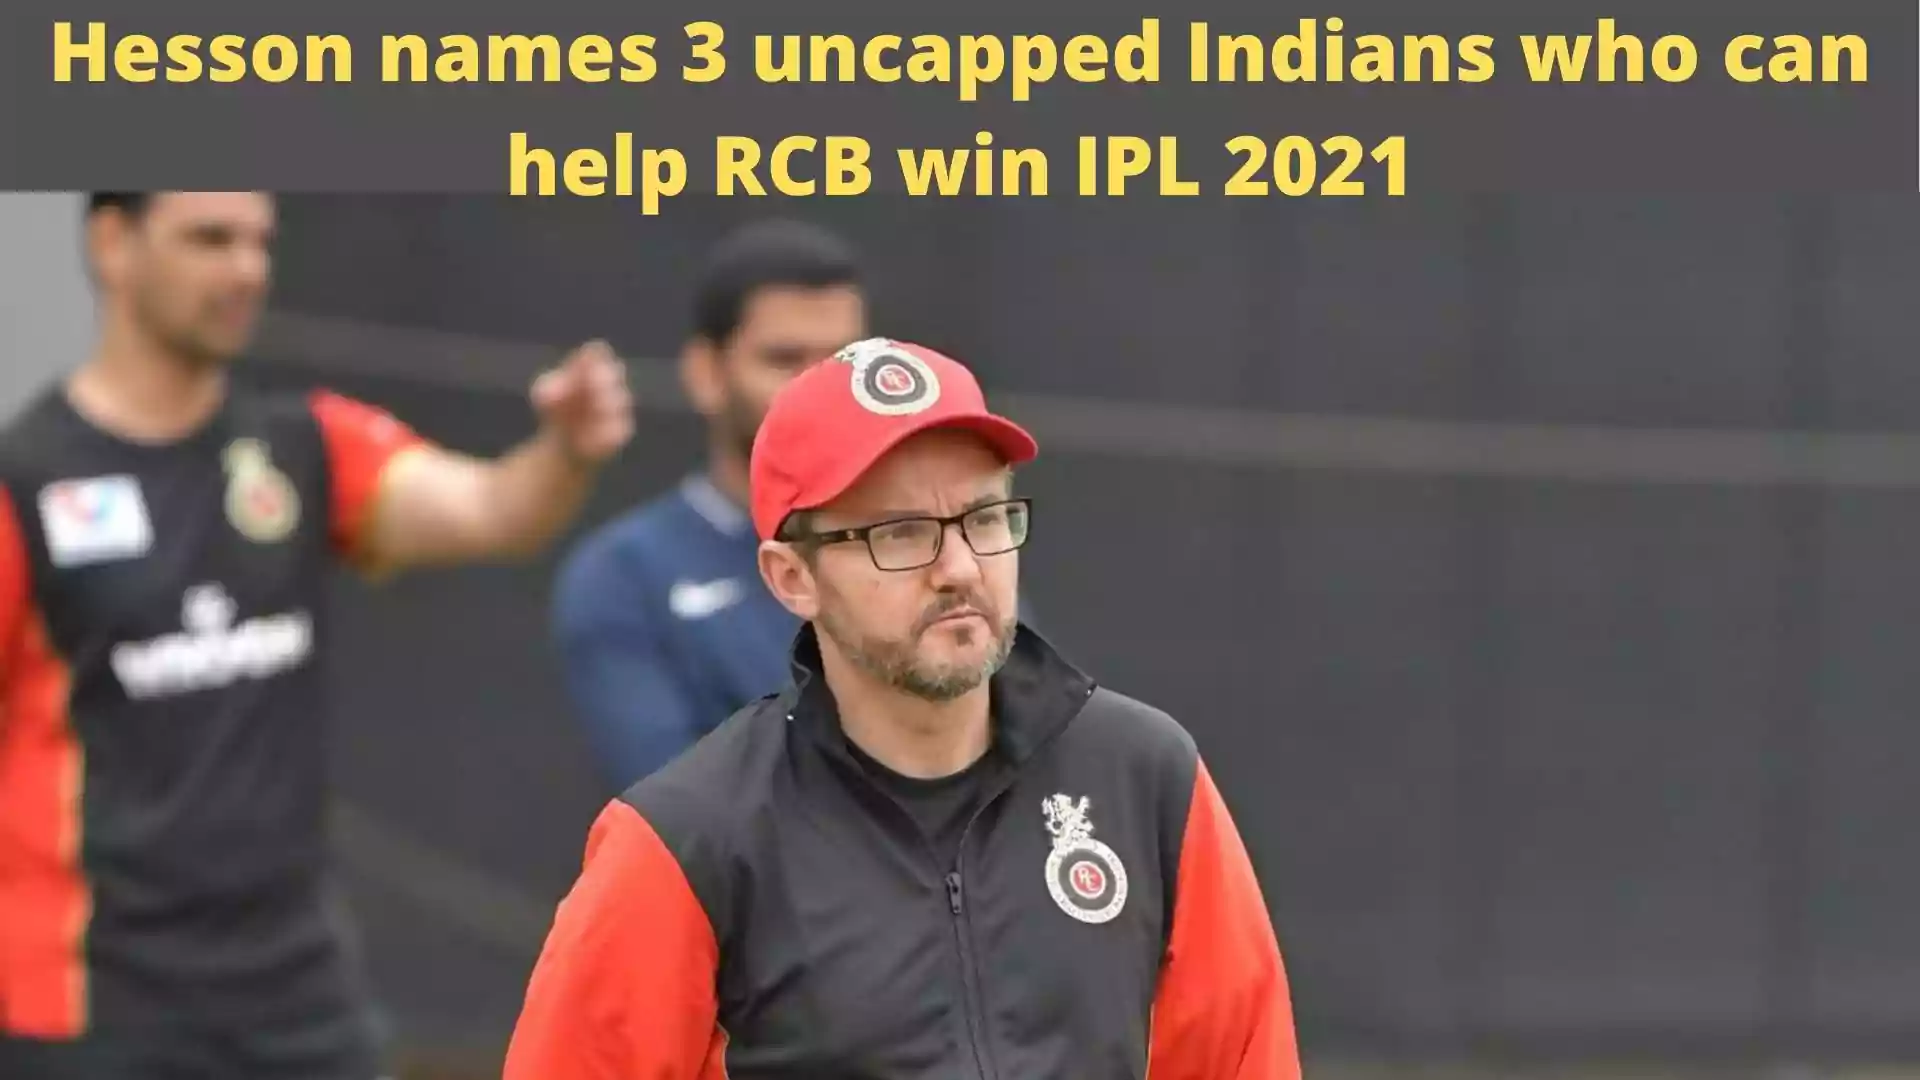 Hesson names 3 uncapped Indians who can help RCB win IPL 2021